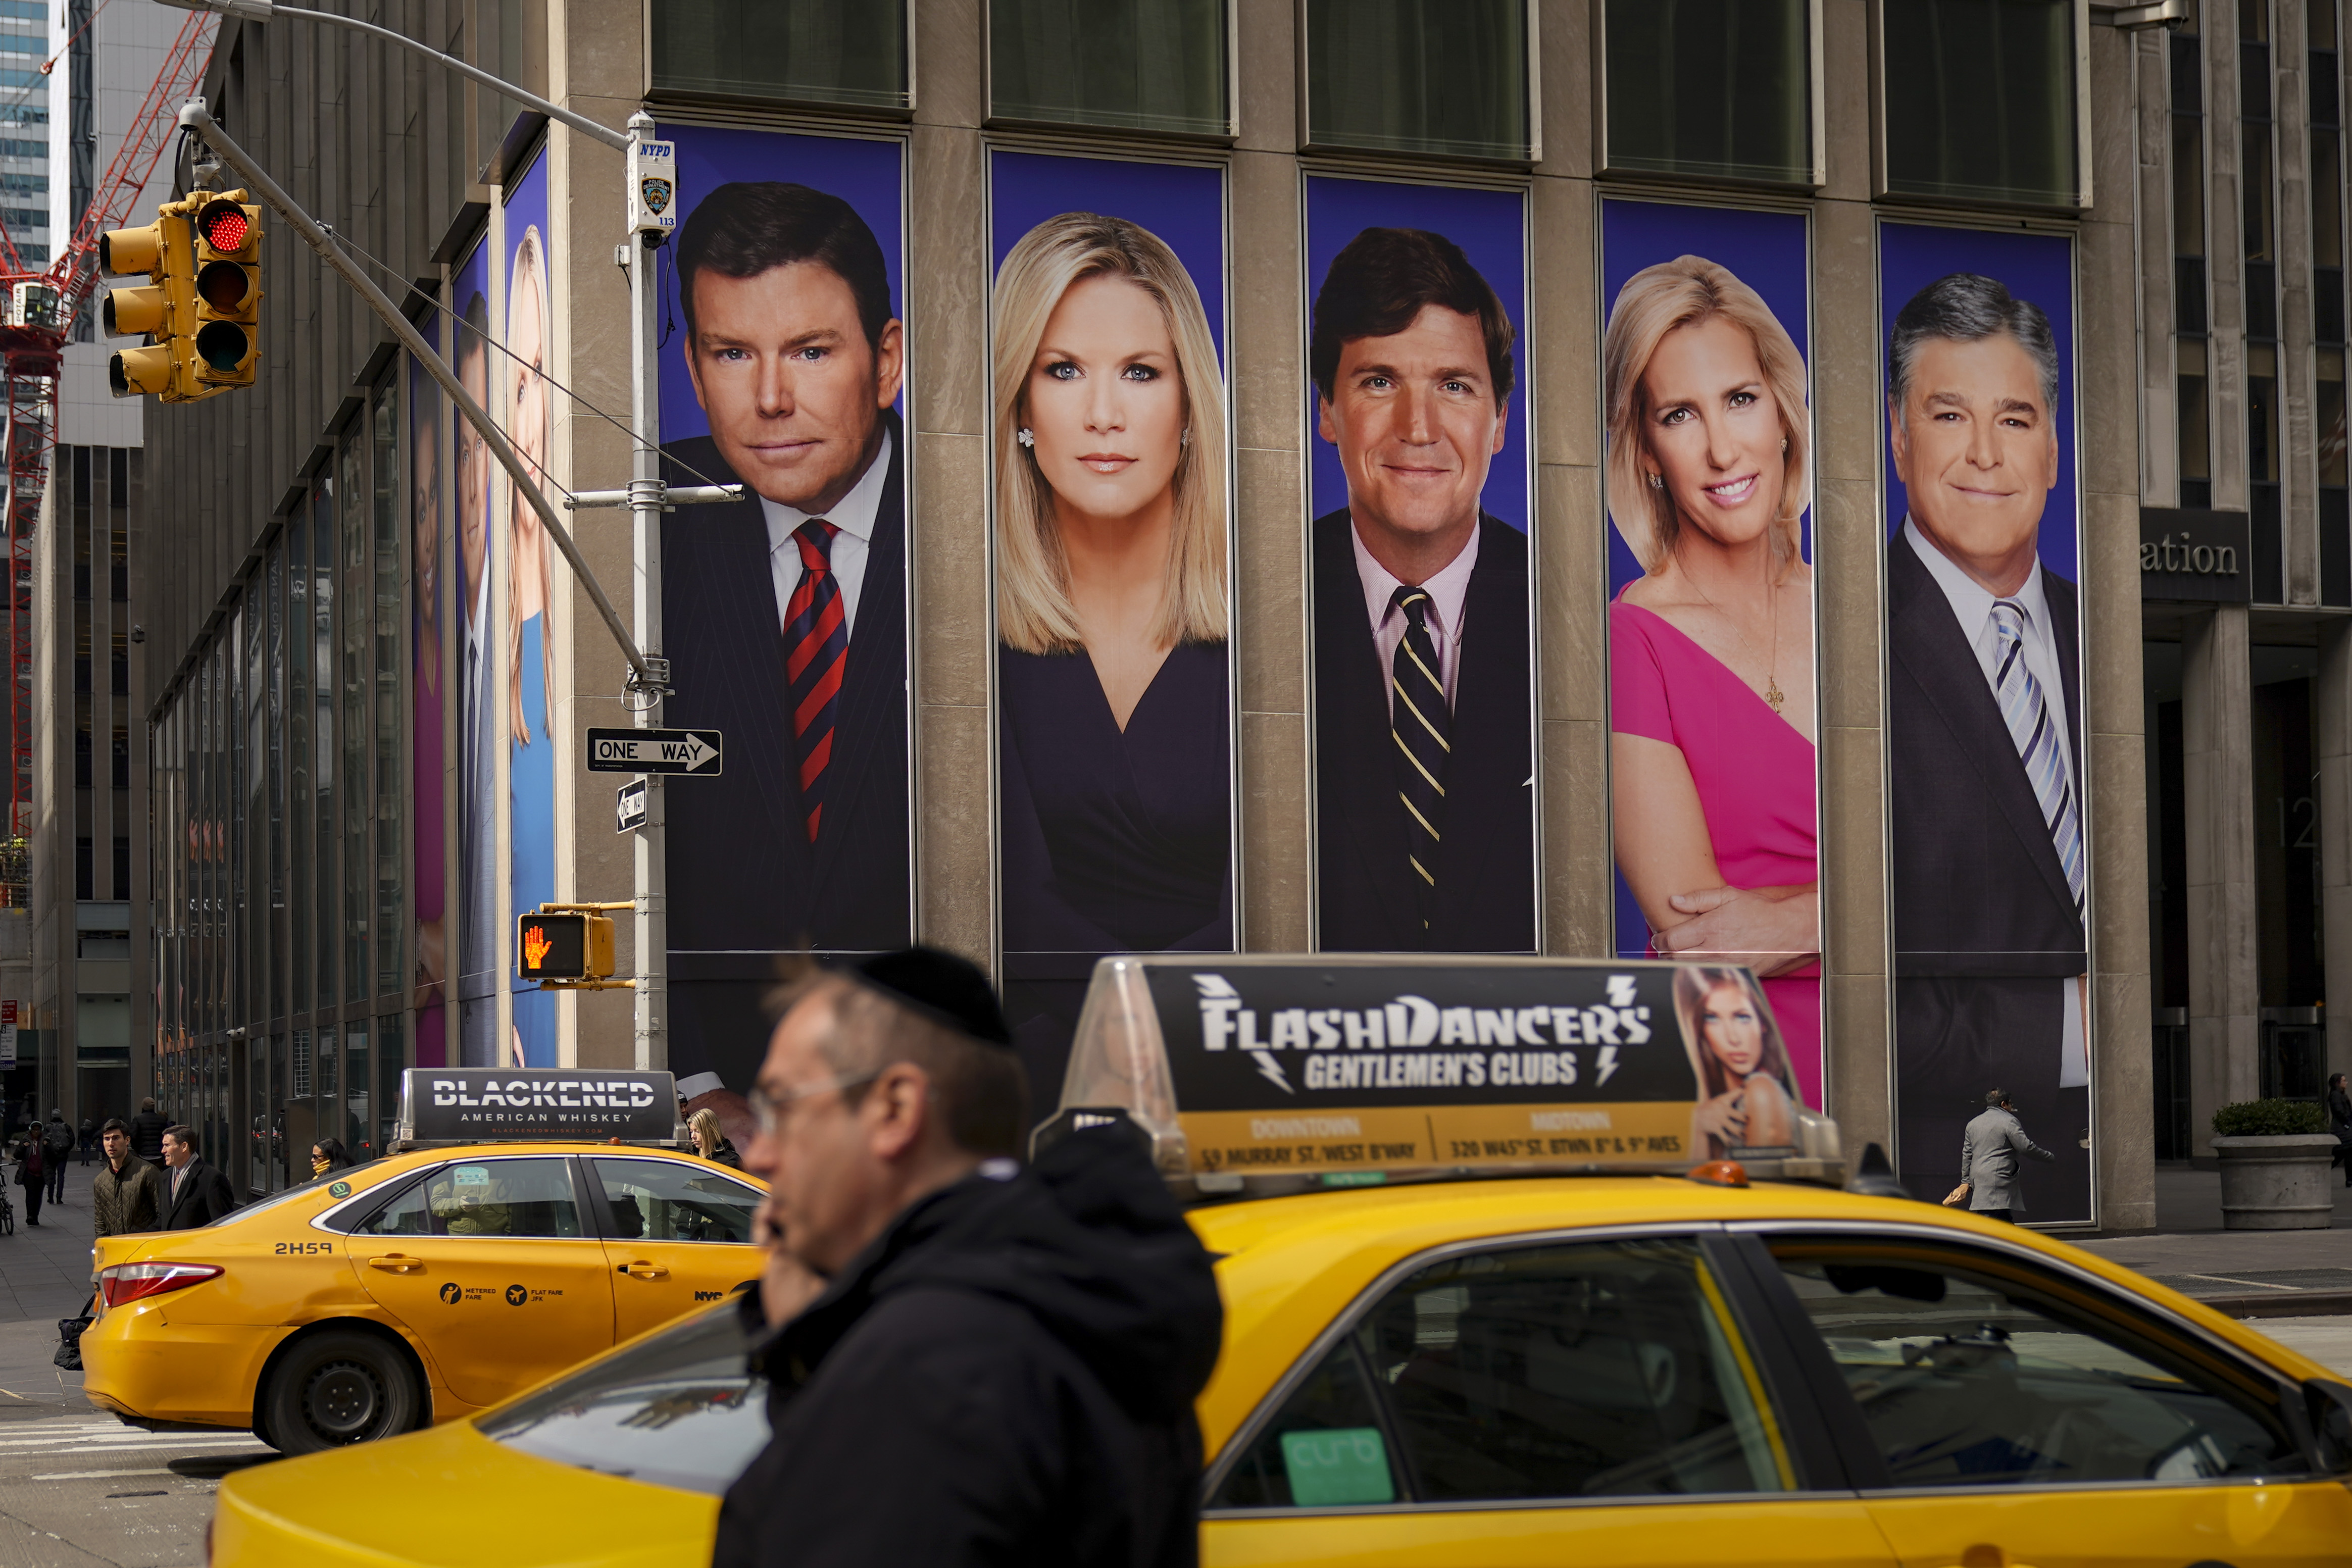 Traffic on Sixth Avenue passes by advertisements featuring Fox News personalities, including Bret Baier, Martha MacCallum, Tucker Carlson, Laura Ingraham, and Sean Hannity, adorn the front of the News Corporation building, March 13, 2019 in New York City. (Drew Angerer/Getty Images)